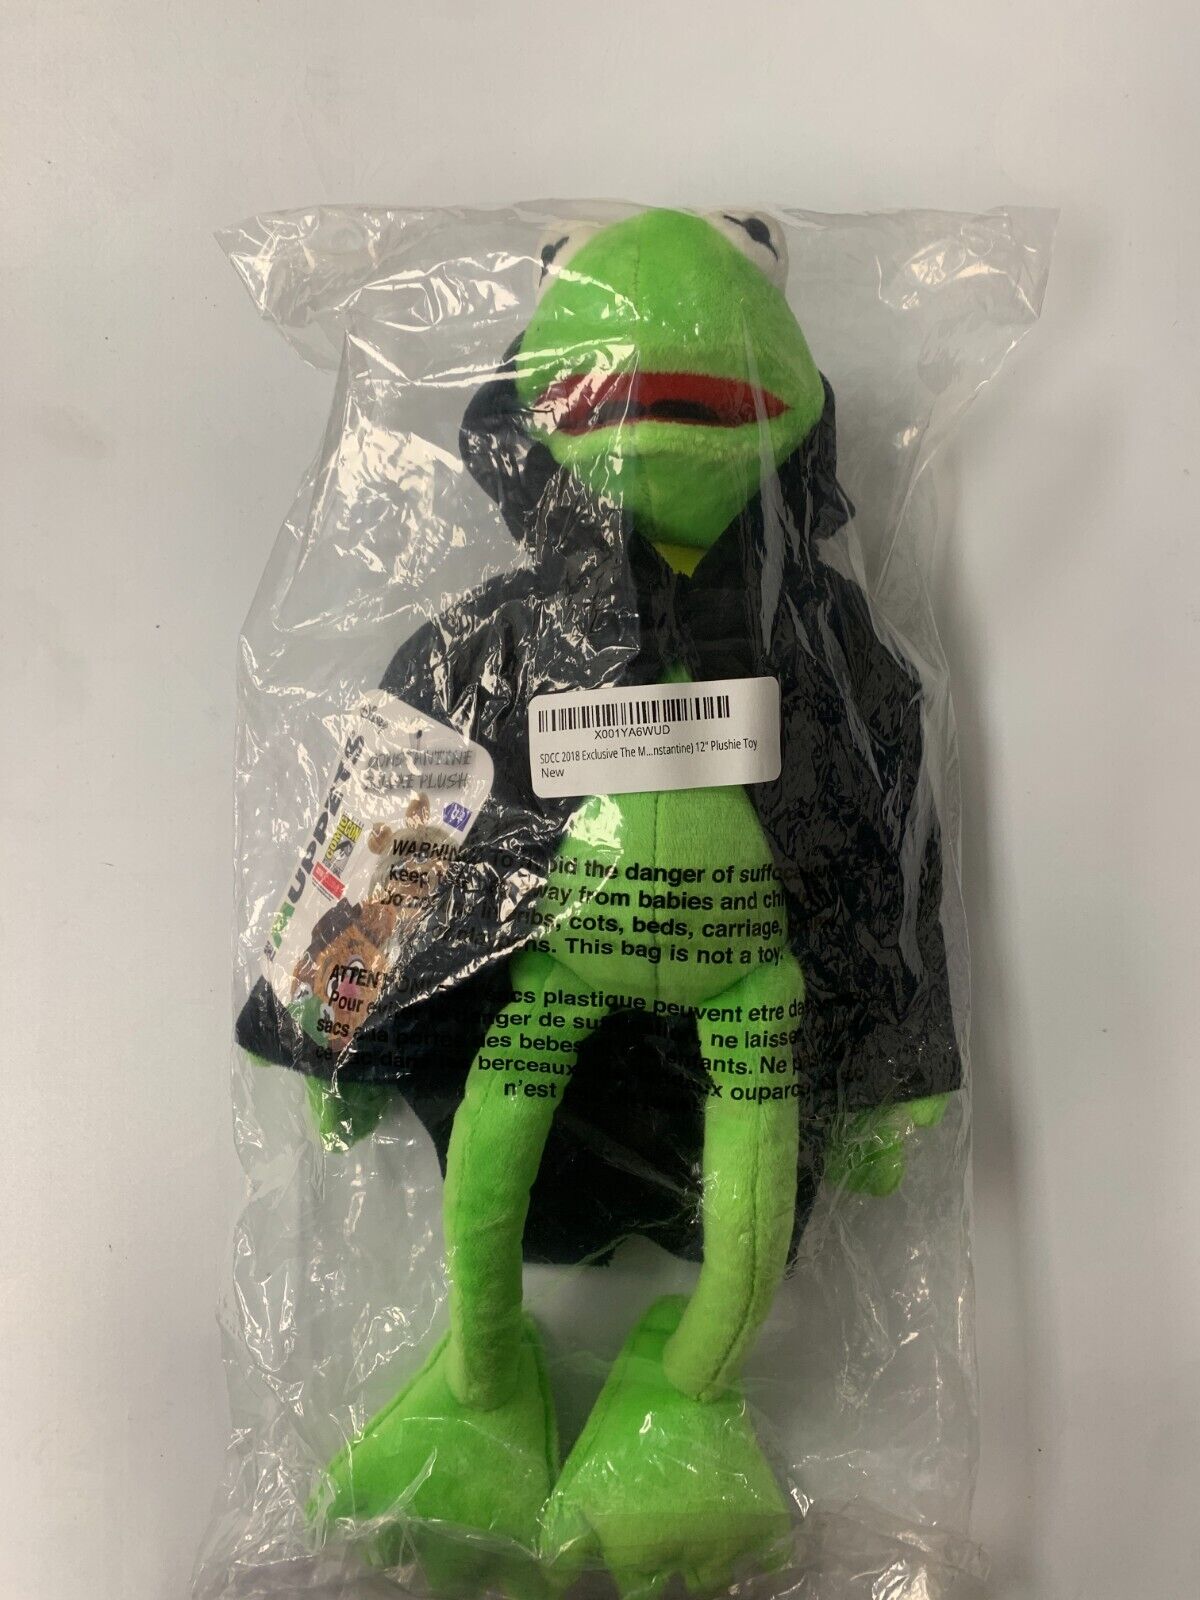 SDCC 2018 Exclusive The Muppets Constantine 12 inch Deluxe Plush Hooded Kermit